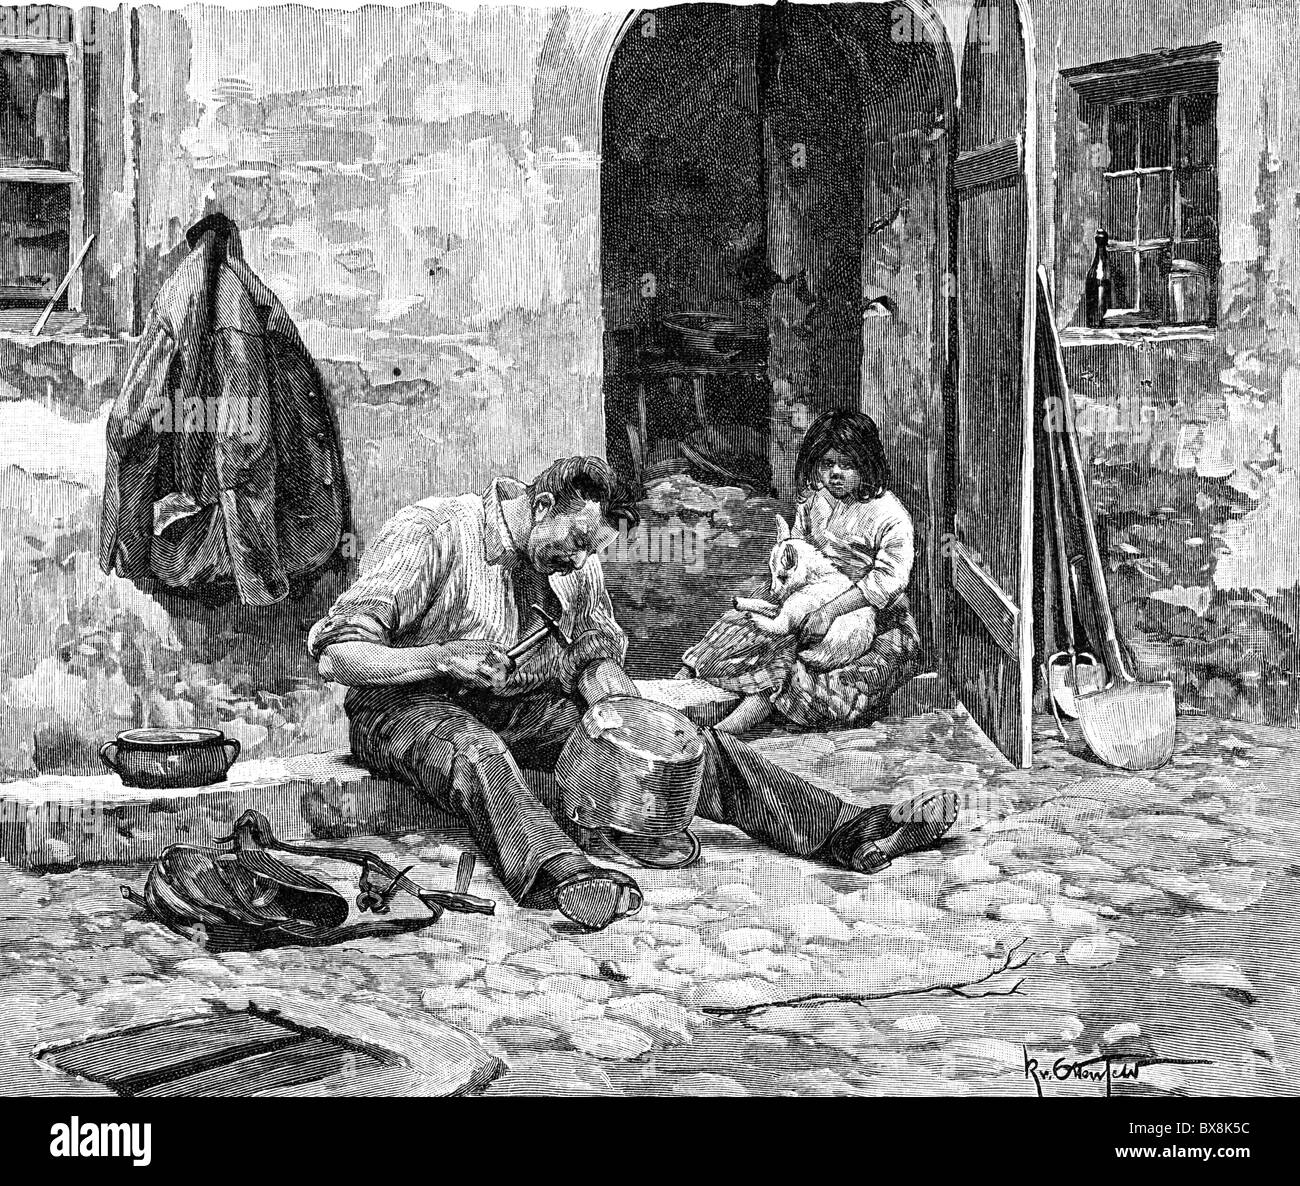 people, professions, tinker, working, Val die Sole, Trentino, wood engraving, 2nd half 19th century, tinsmith, work, working, craftsman, handcraft, Italy, Austria-Hungary, Austria, cisleithania, Austro-Hungarian Empire, Austro Hungarian, historic, historical, Additional-Rights-Clearences-Not Available Stock Photo